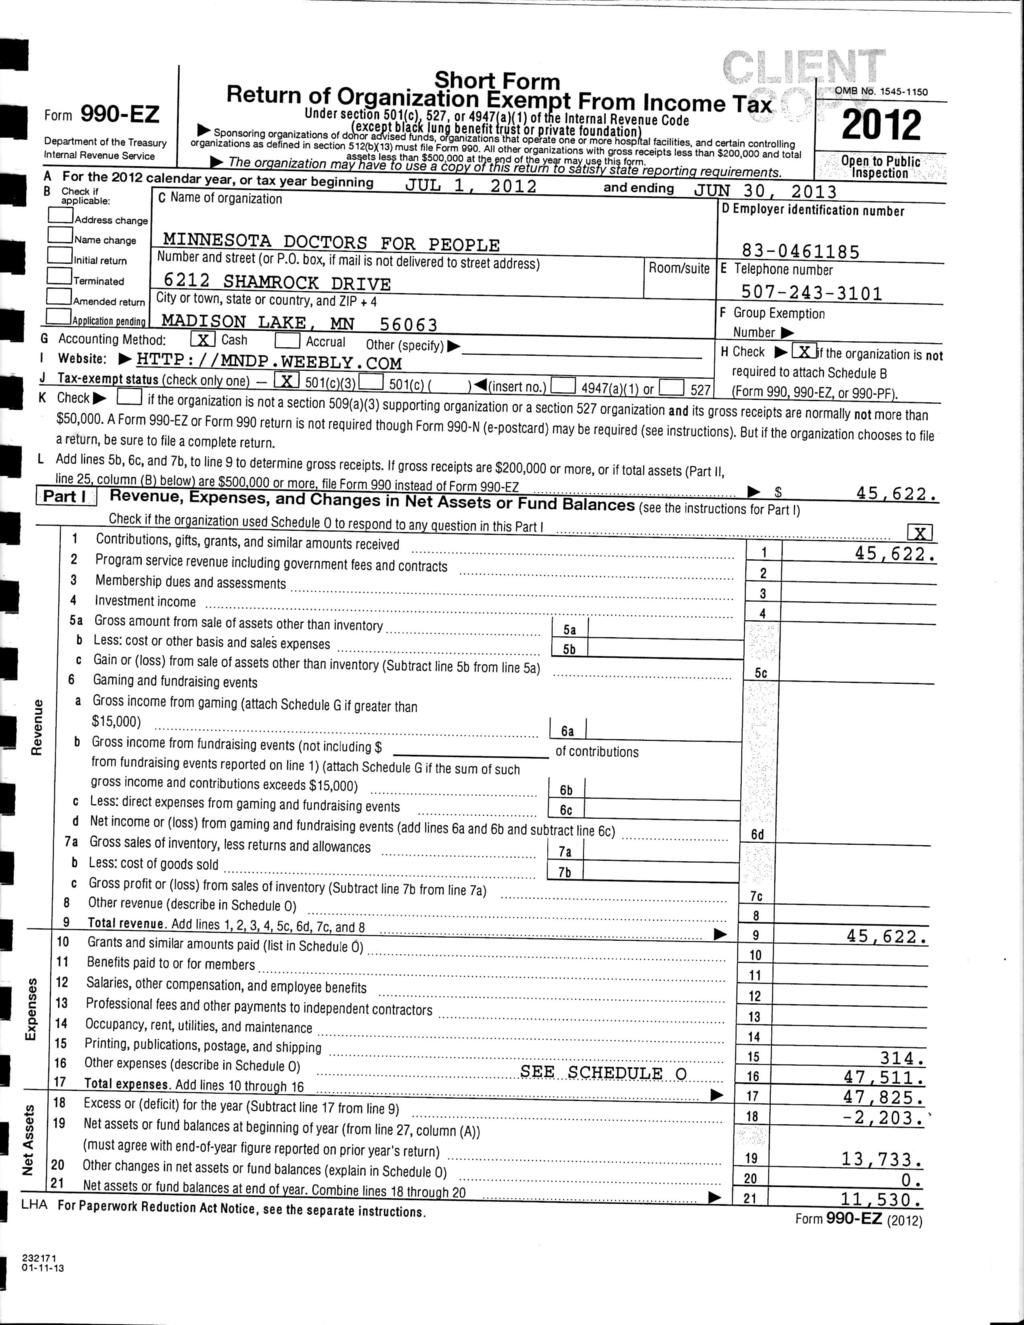 Form 990-EZ Short Form Return of Organization Exempt From Income Tax Under section 501(c). 527, or 4947(a)(1) of the Internal Revenue Code Department of the Treasury Interna!